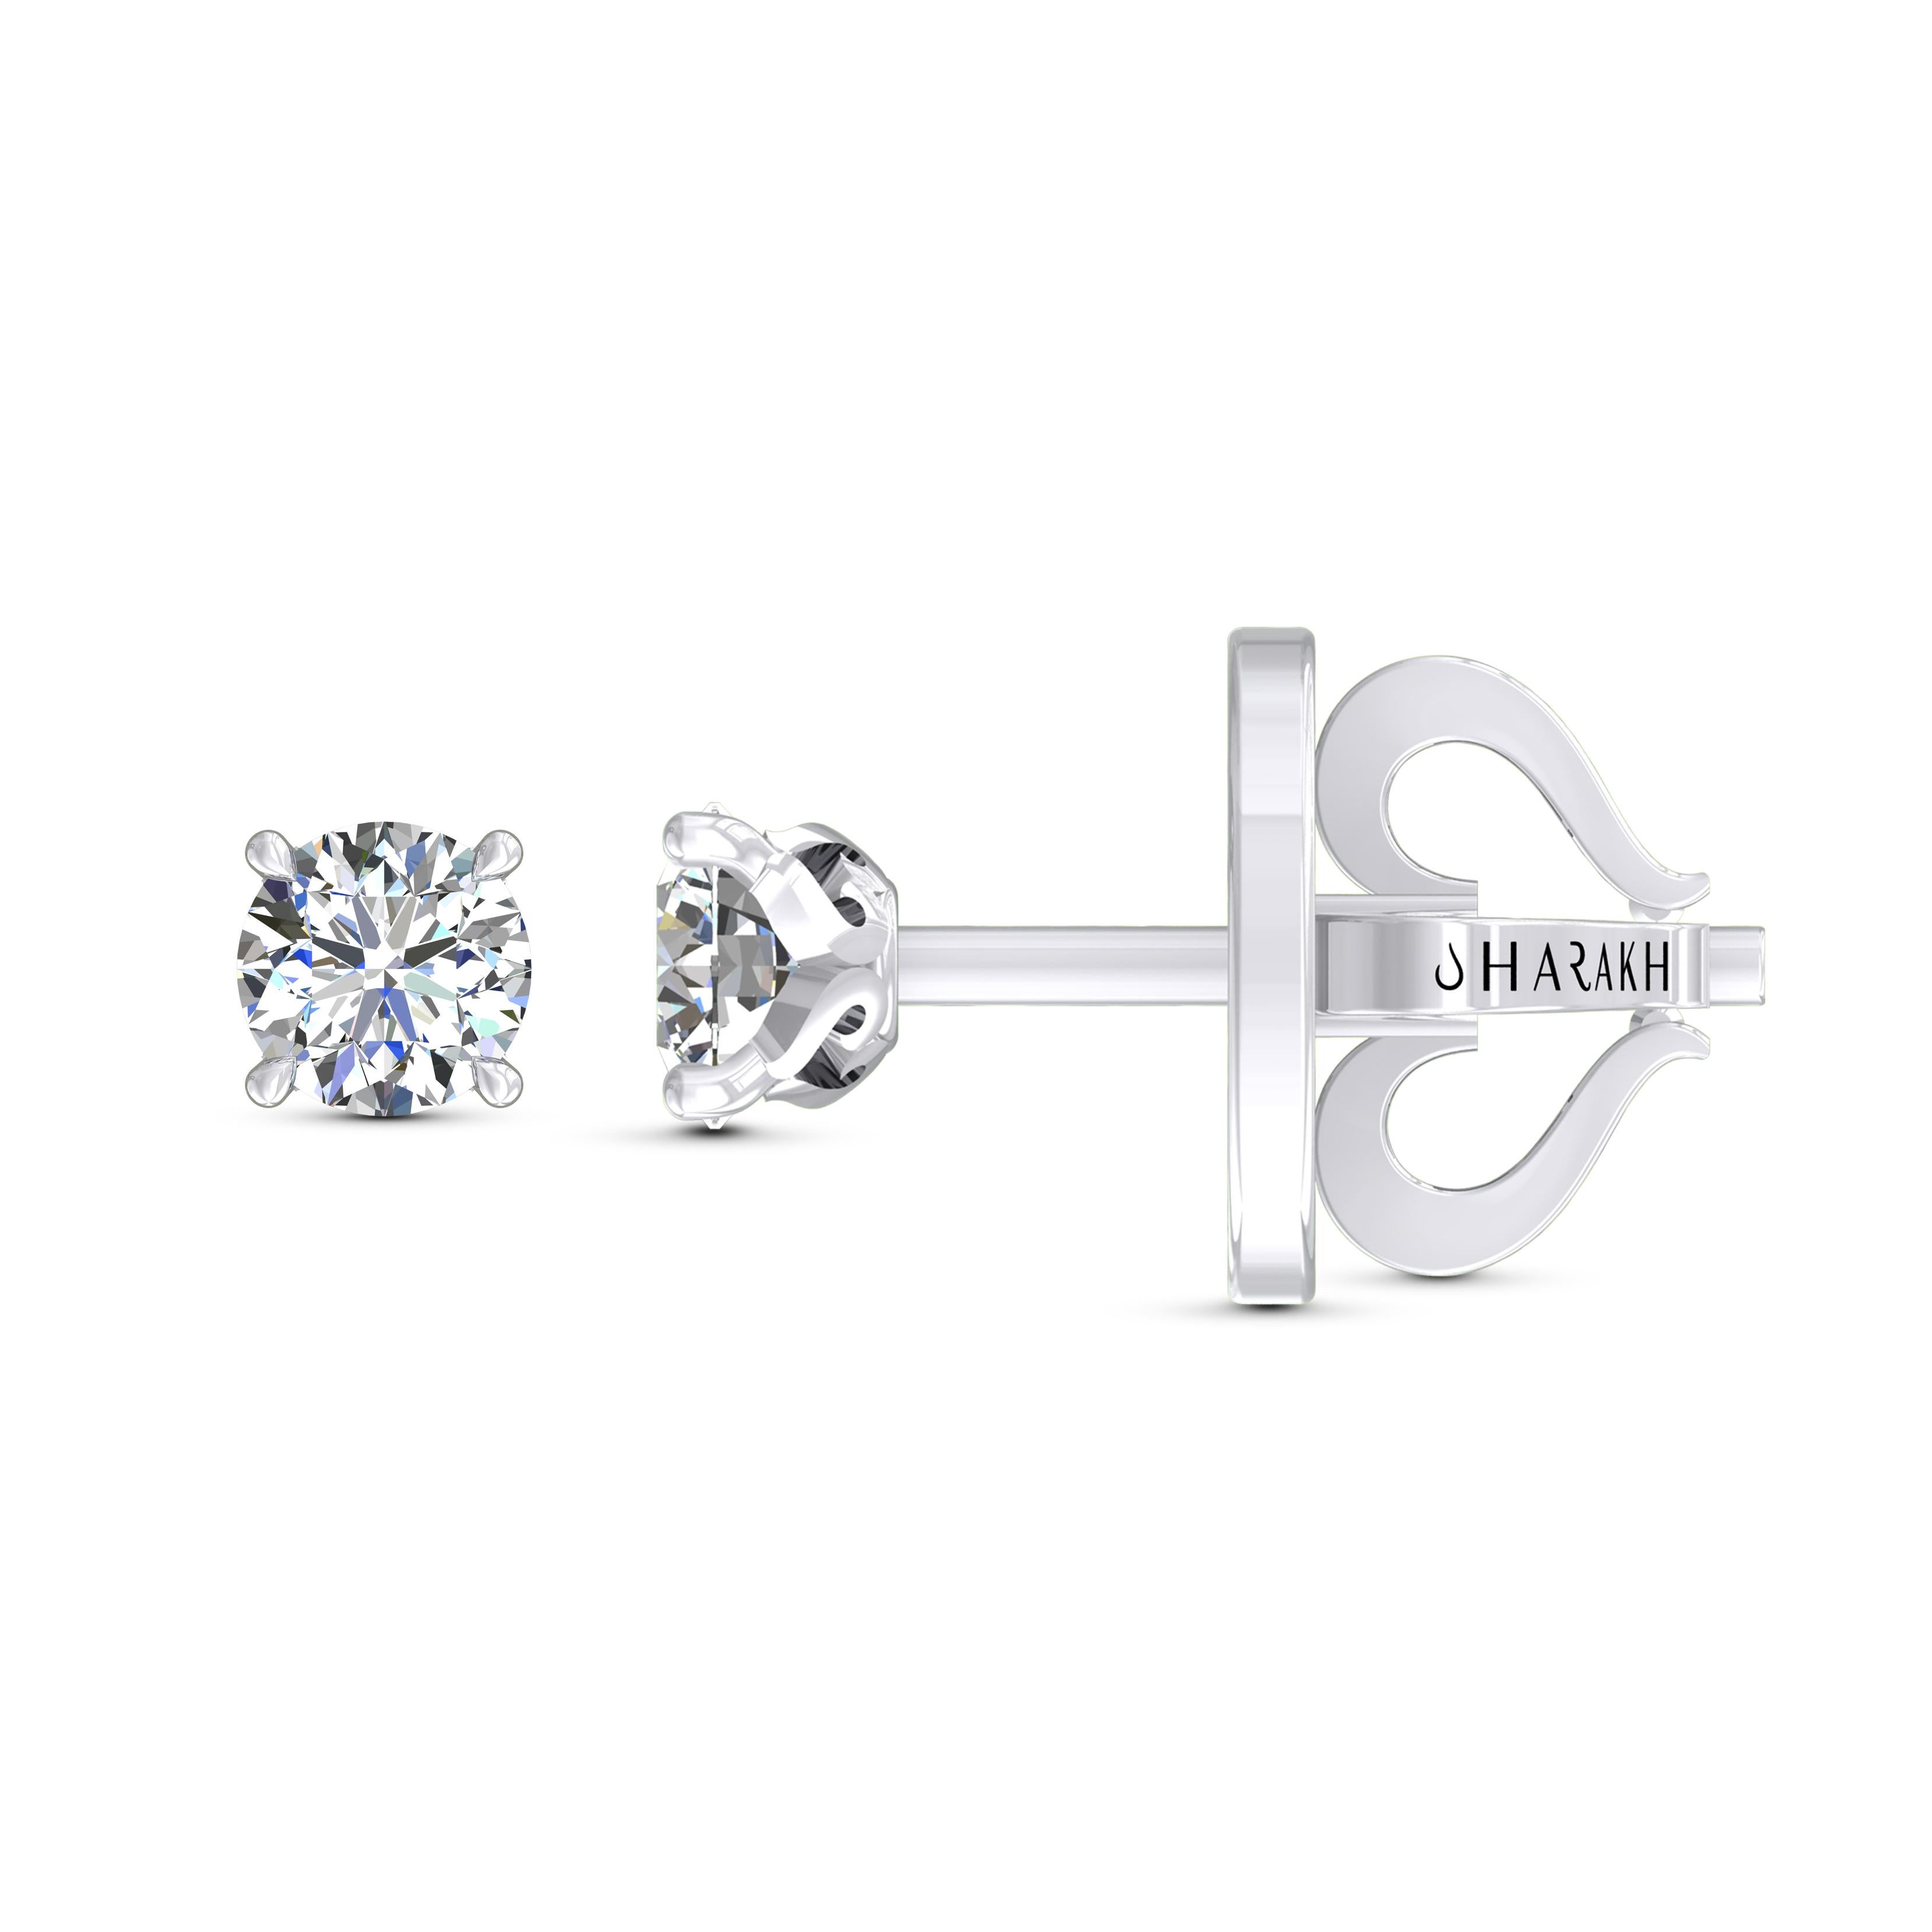 Contemporary Harakh GIA Certified 0.54 Carat F Color VVS1 Clarity 18 KT Diamond Stud Earrings For Sale